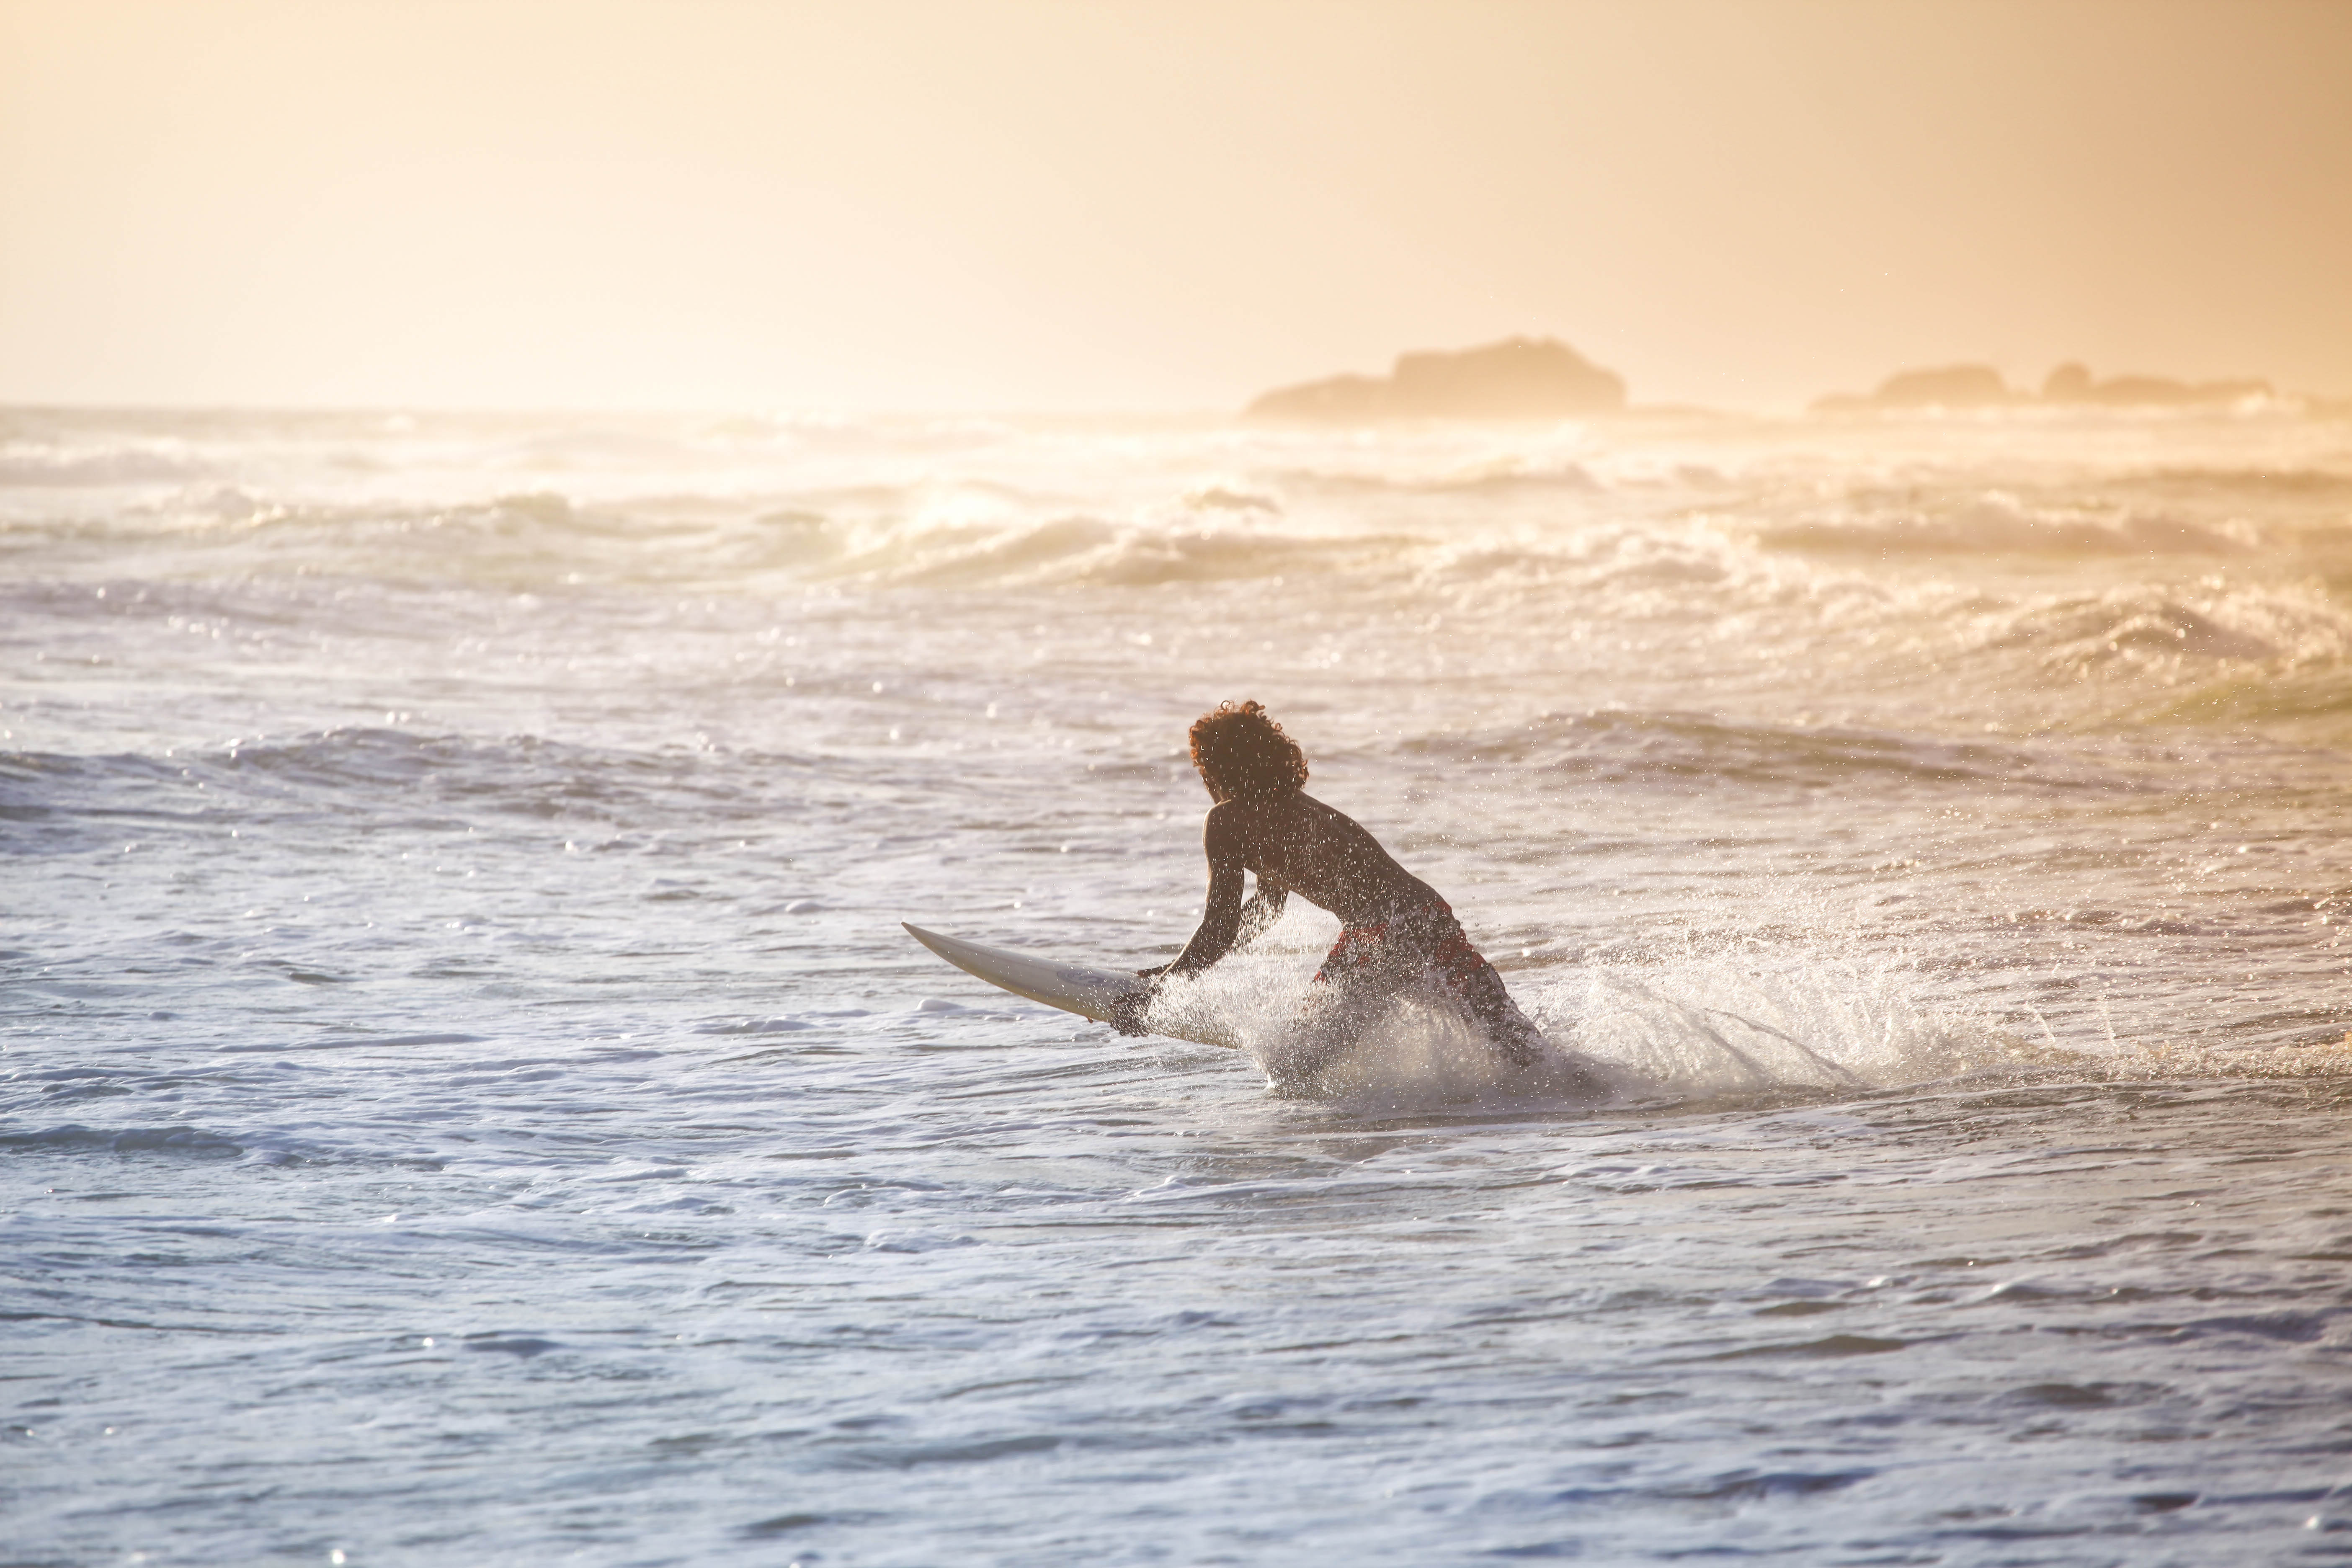 Surfer charging a sunset swell. Photo: Charlie Malmqvist.